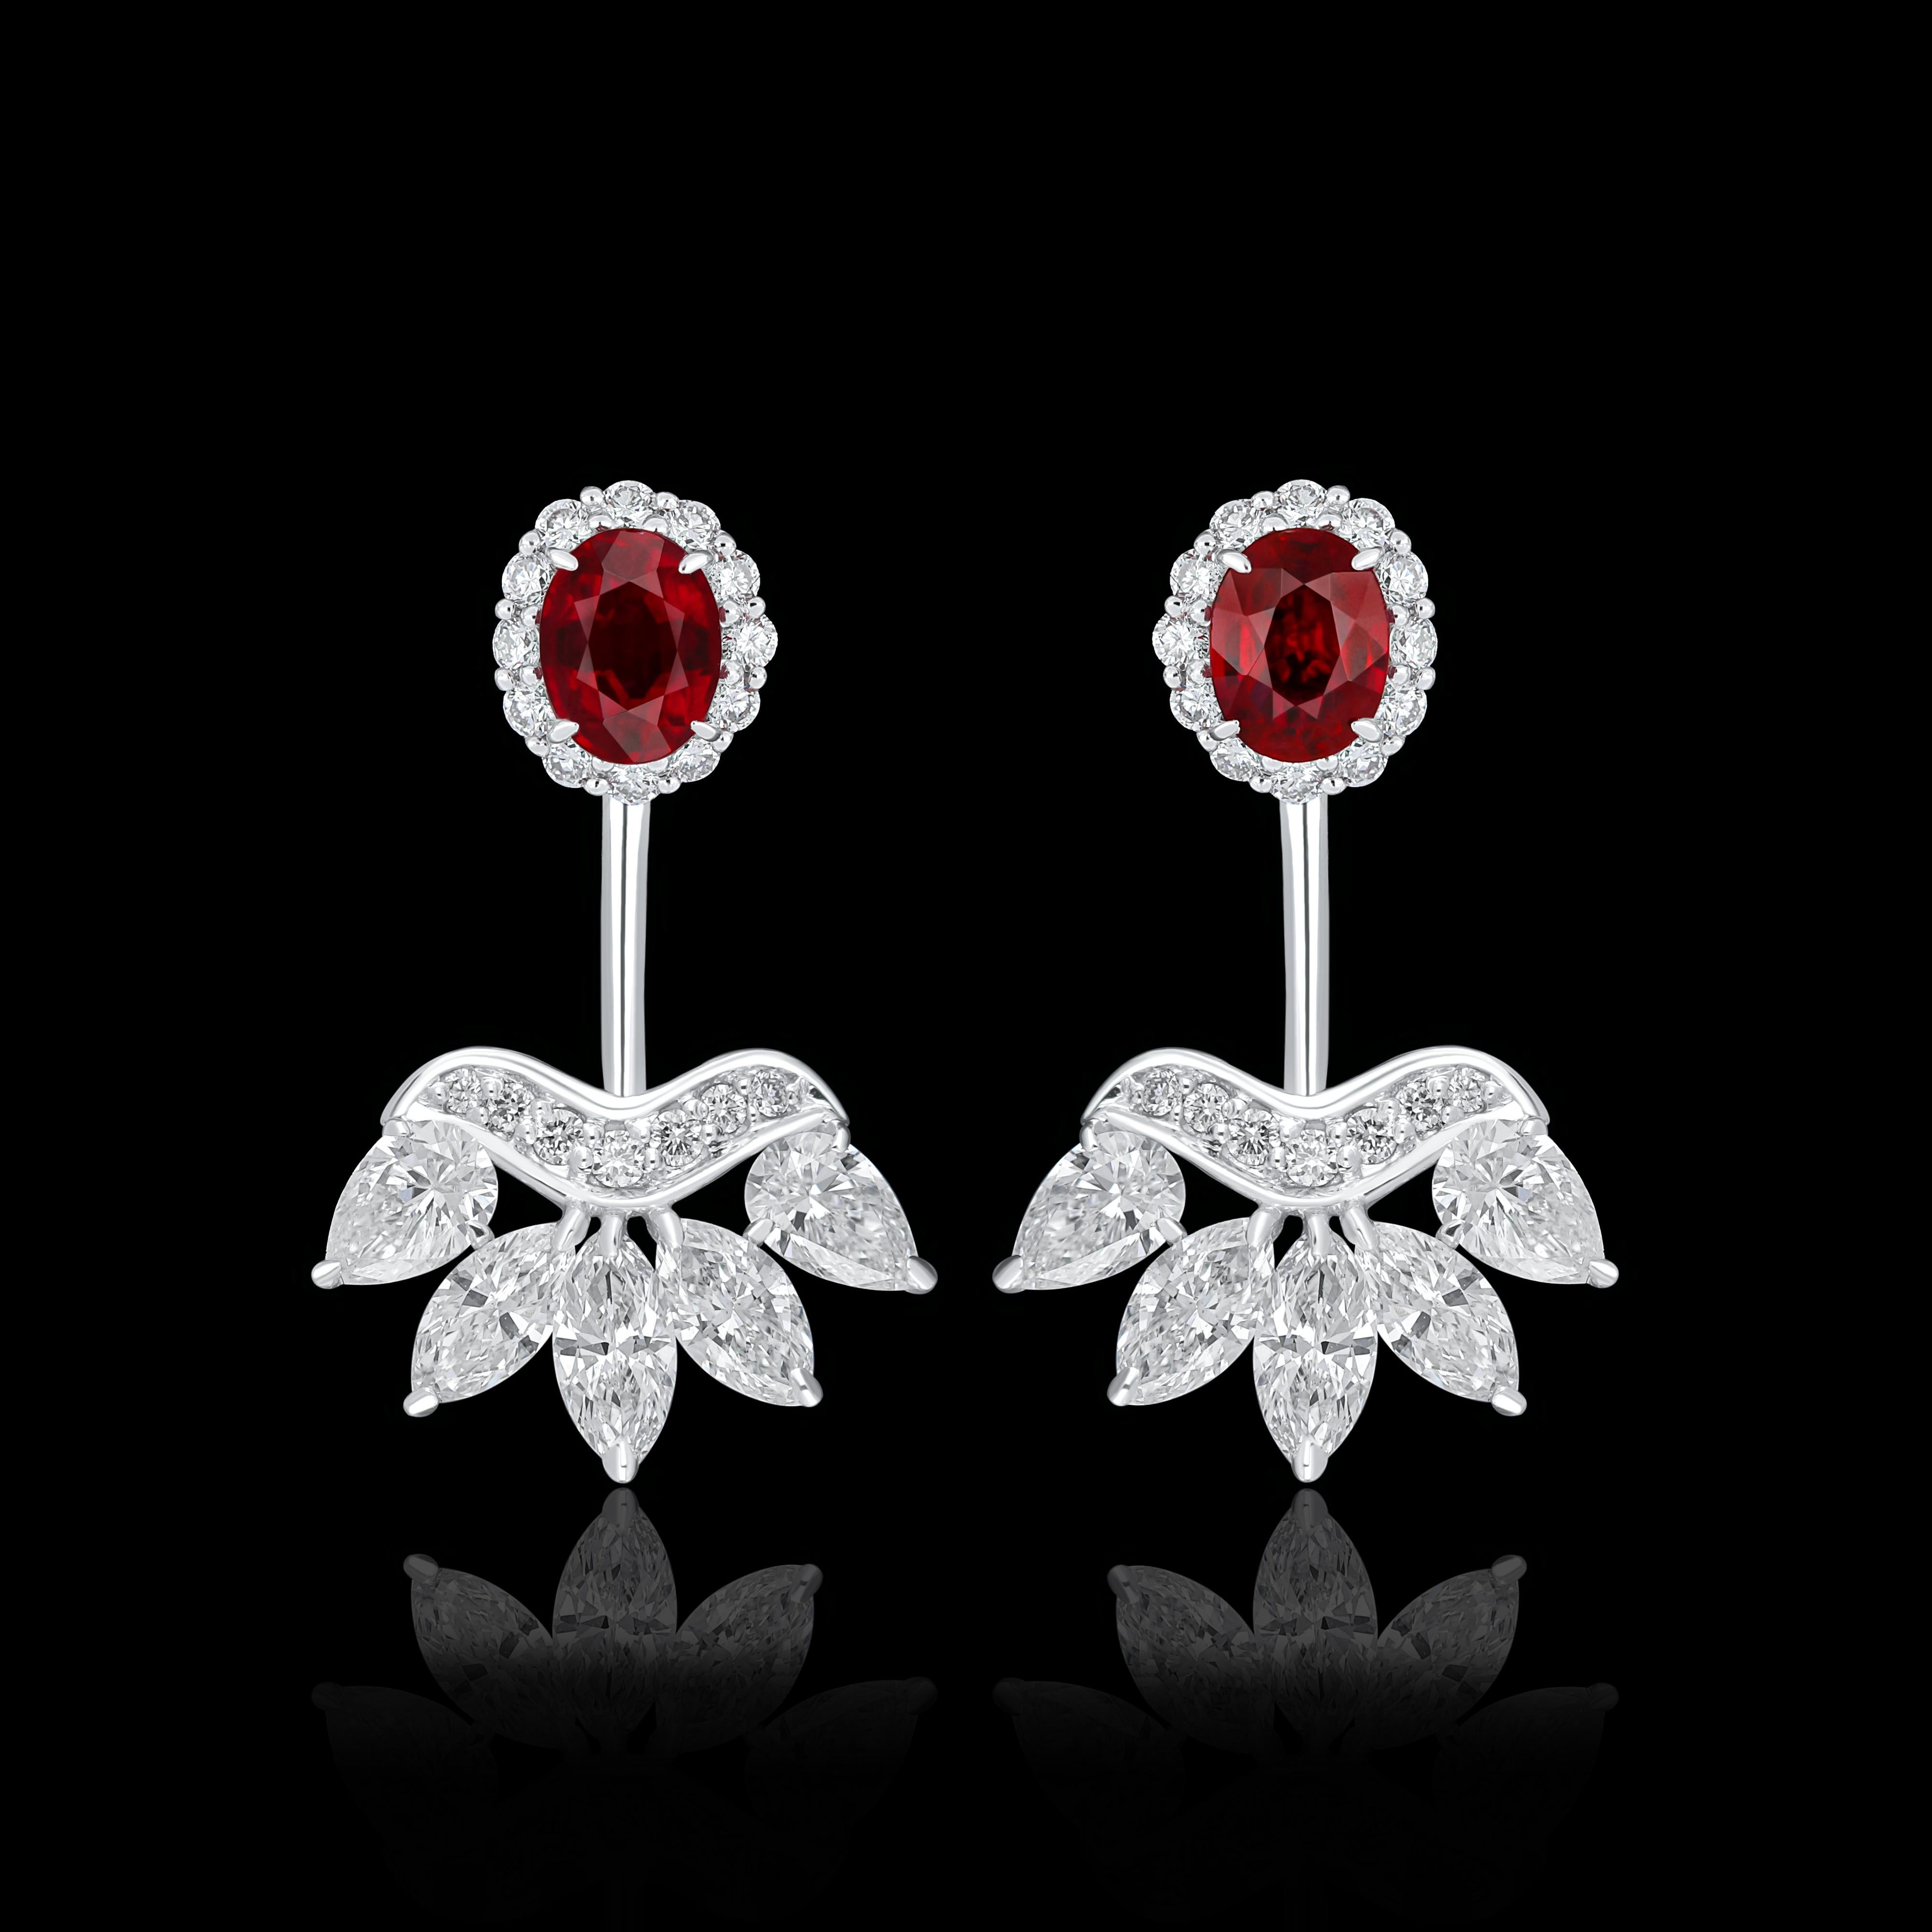 Elegant and exquisitely detailed 18 Karat White Gold Earring, center set with 0.77Cts .Oval Shape Ruby Mozambique and micro pave set Diamonds, weighing approx. 1.17Cts Beautifully Hand crafted in 18 Karat White Gold.

Stone Detail:
Ruby Mozambique: